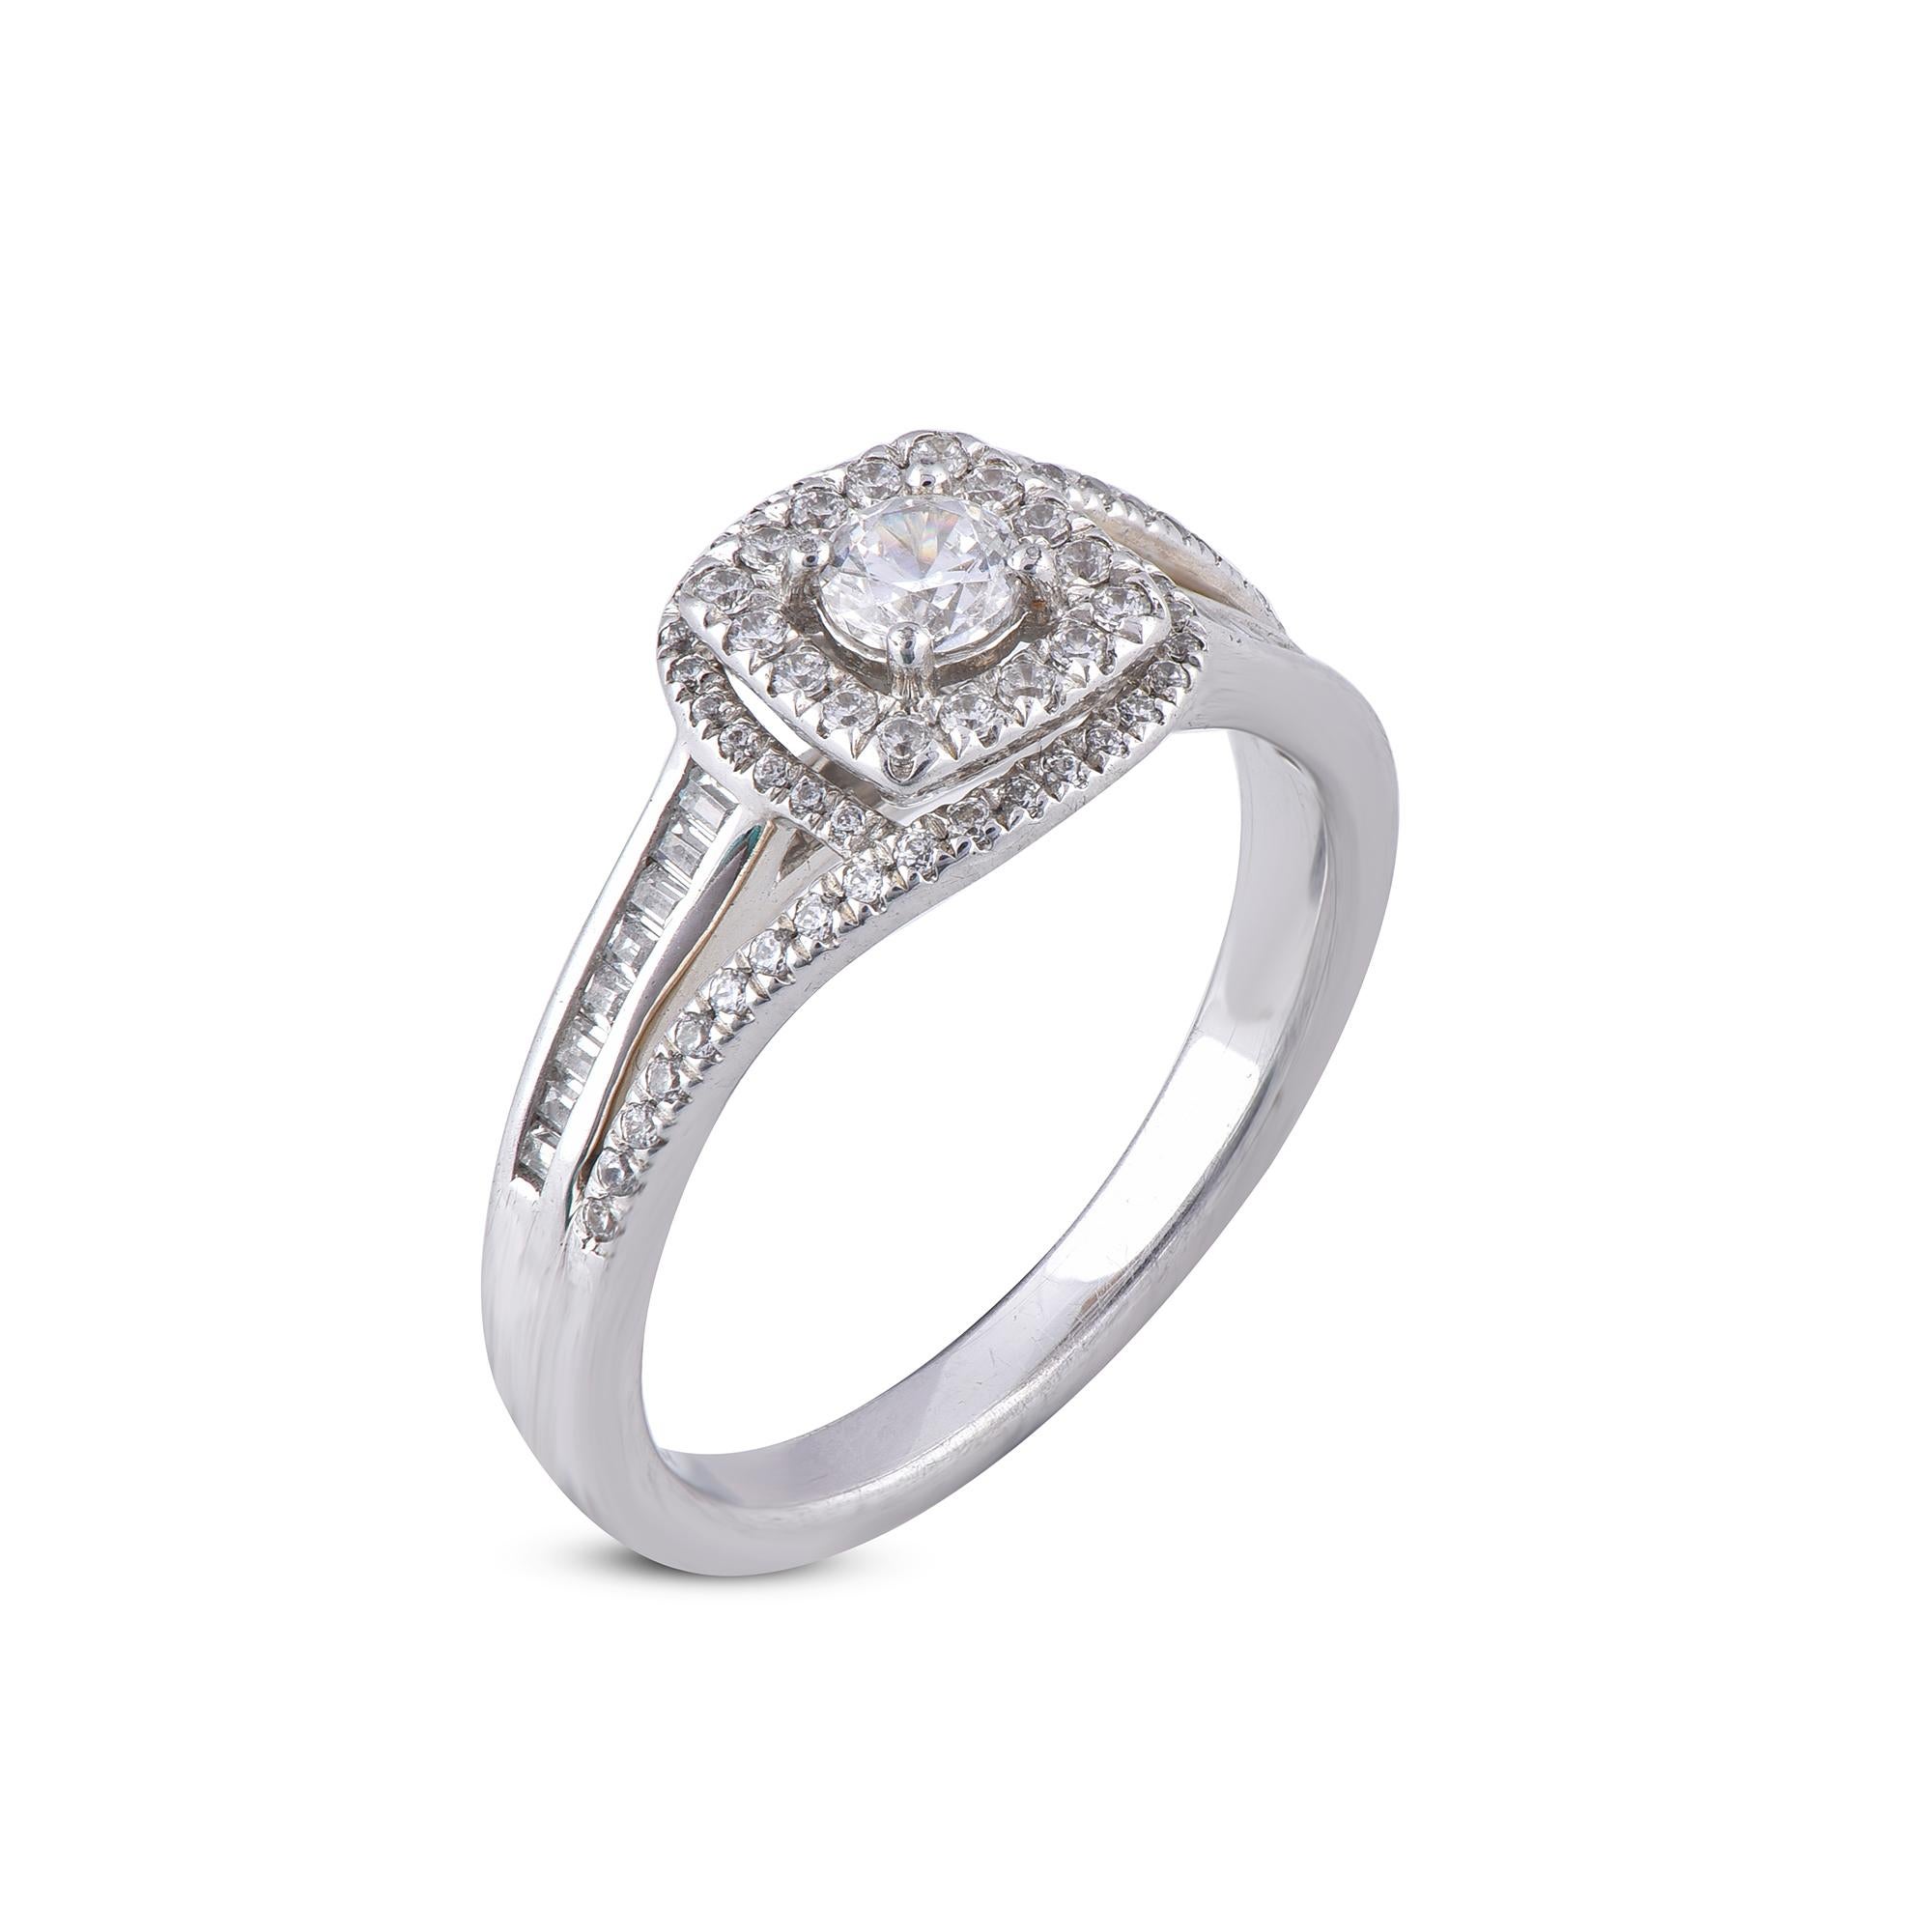 Honor the women you love with this designer curvy shank diamond engagement ring is expertly crafted in 14 Karat white gold and features 63 round diamond and 14 Baguette cut diamond set in pave setting. This engagement ring features 0.50ct of lined